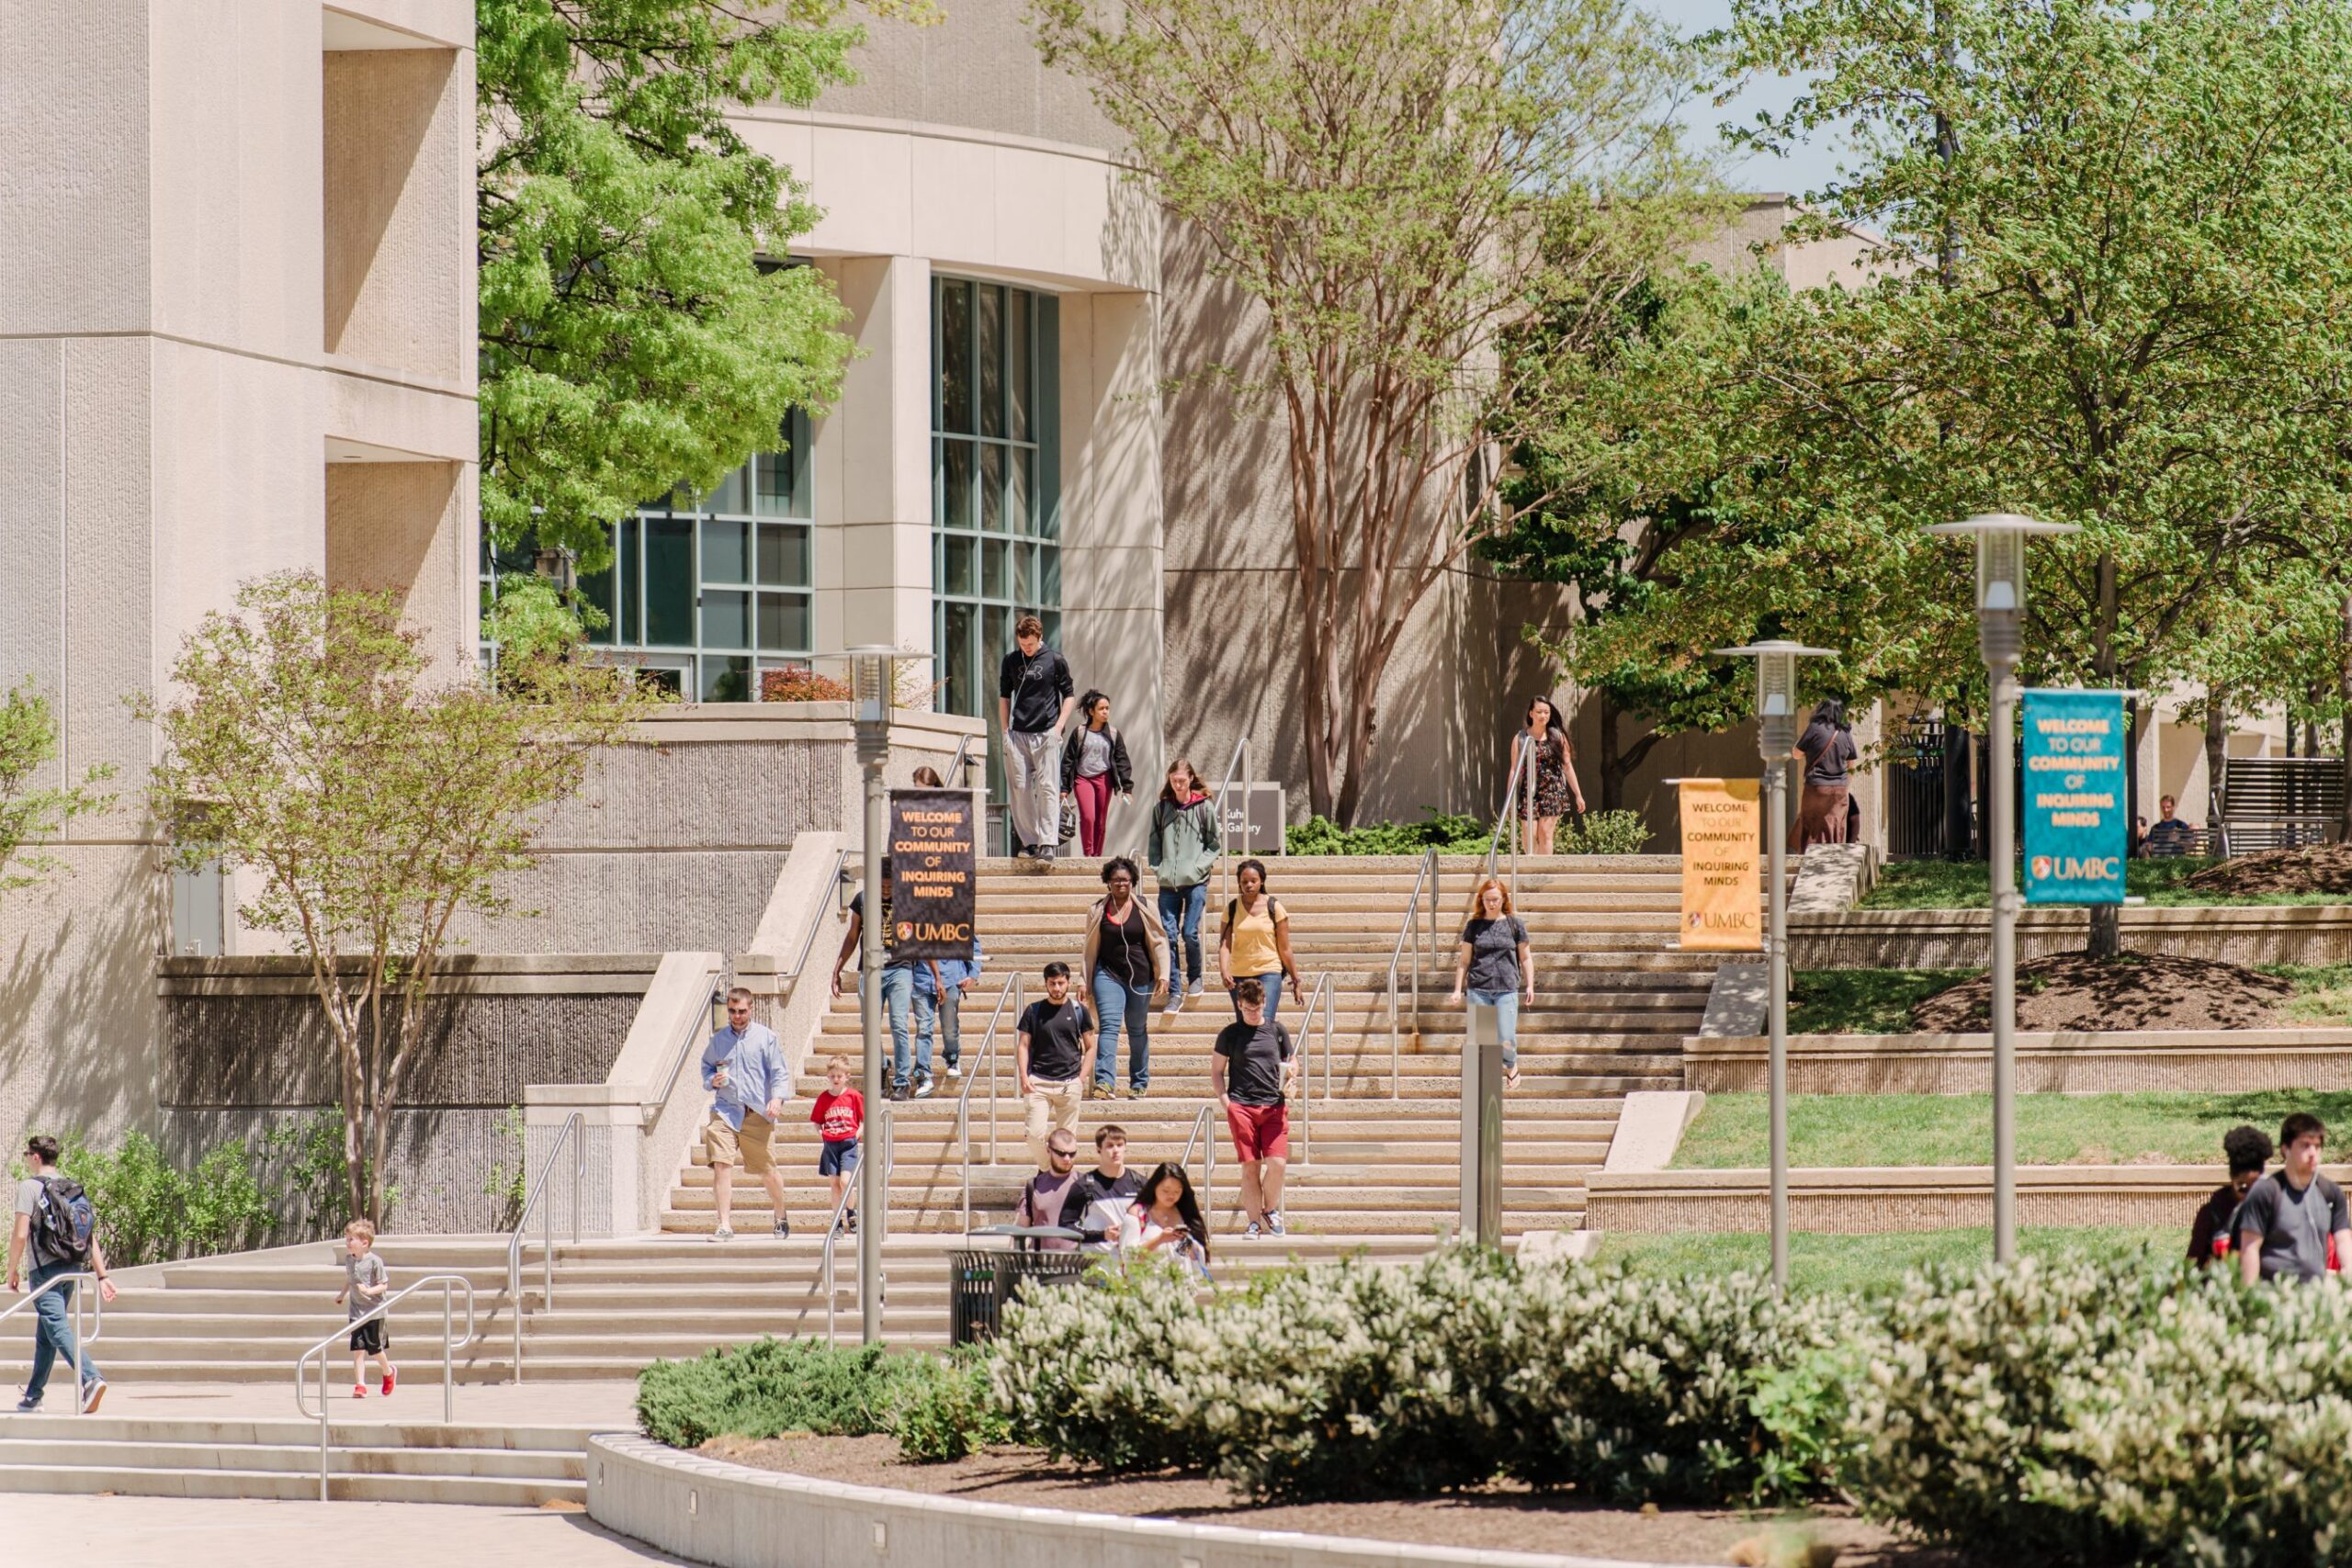 Business First names UMBC one of nation’s best public universities